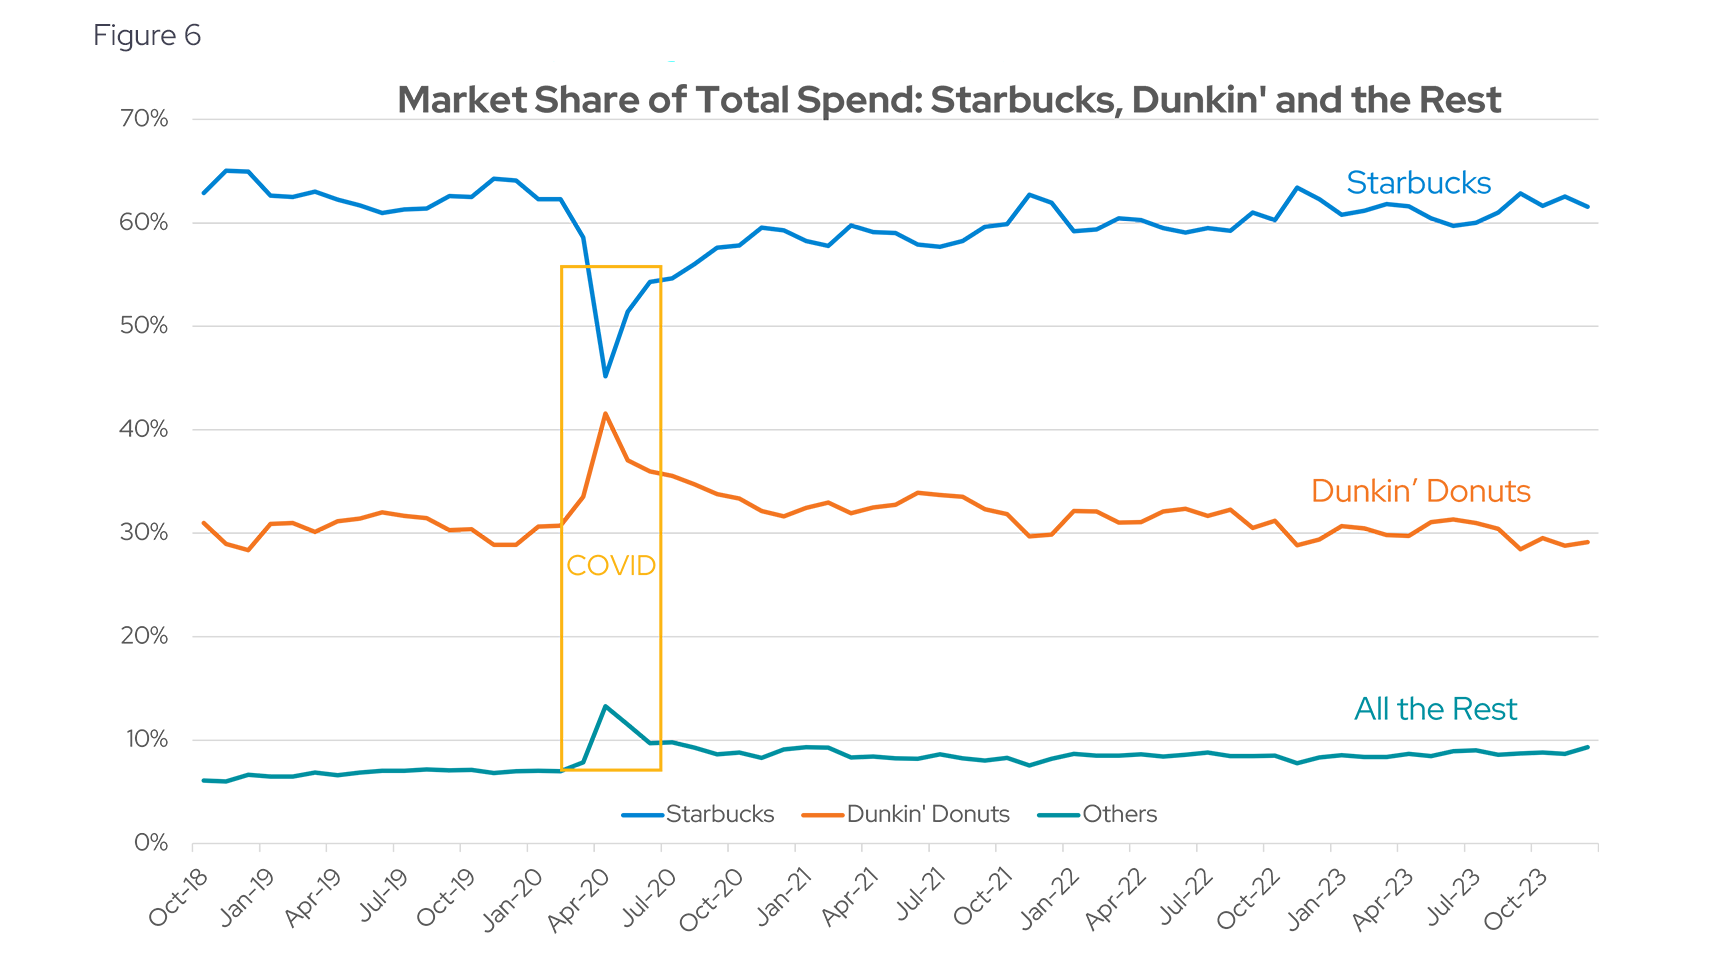 Market Share of Total Spend: Starbucks, Dunkin' and the Rest